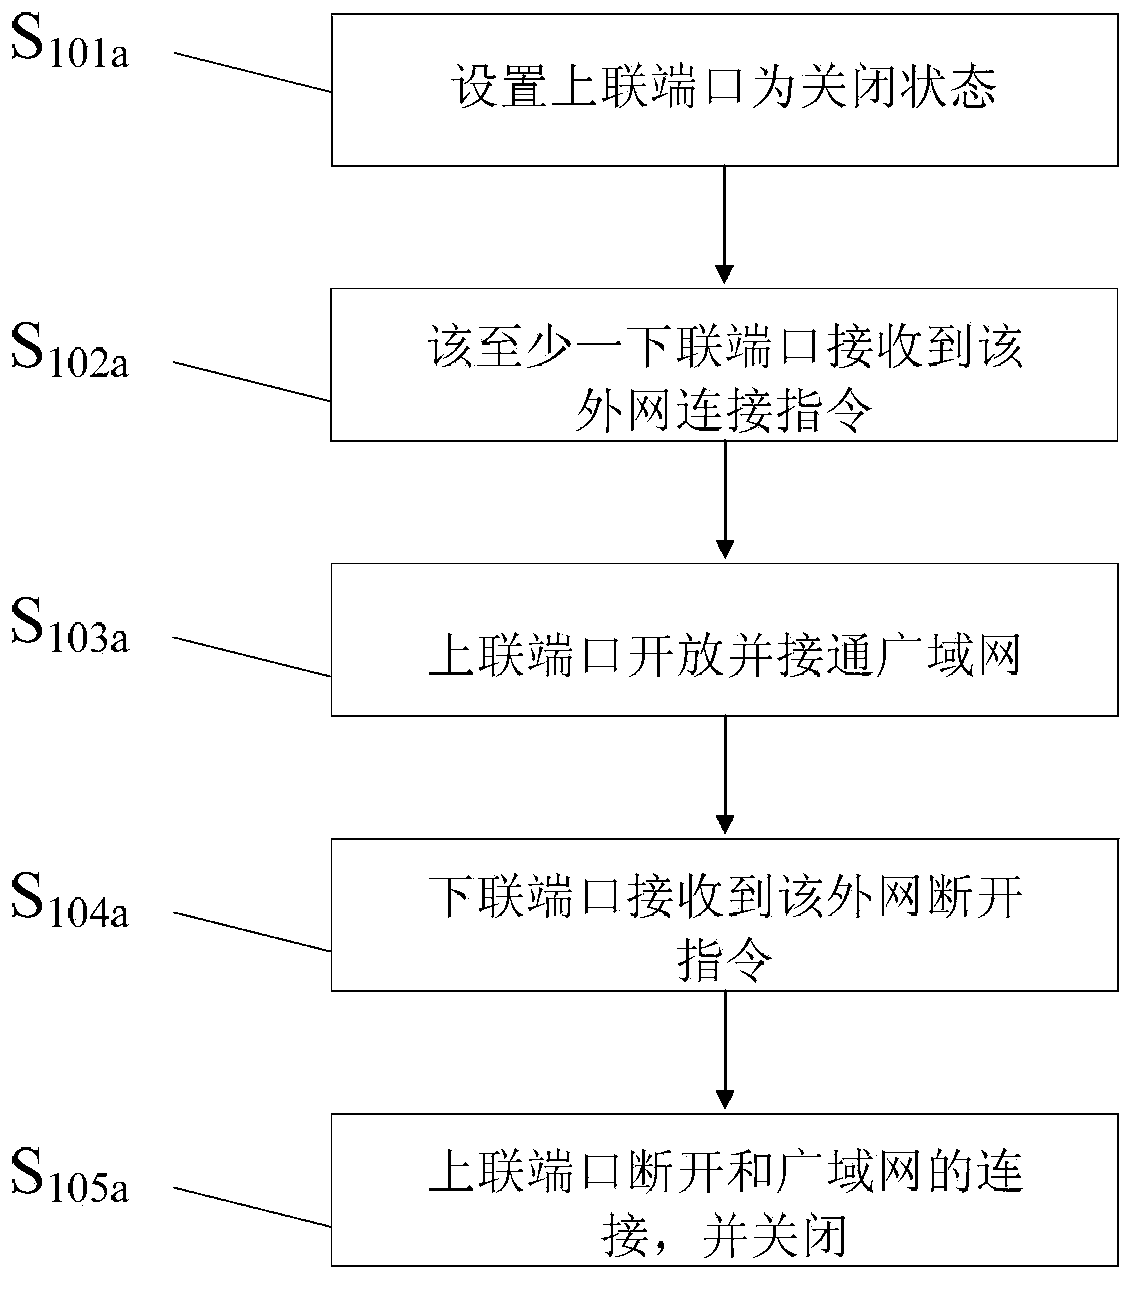 Switch, wide area network connection system, network and wide area network connection control method